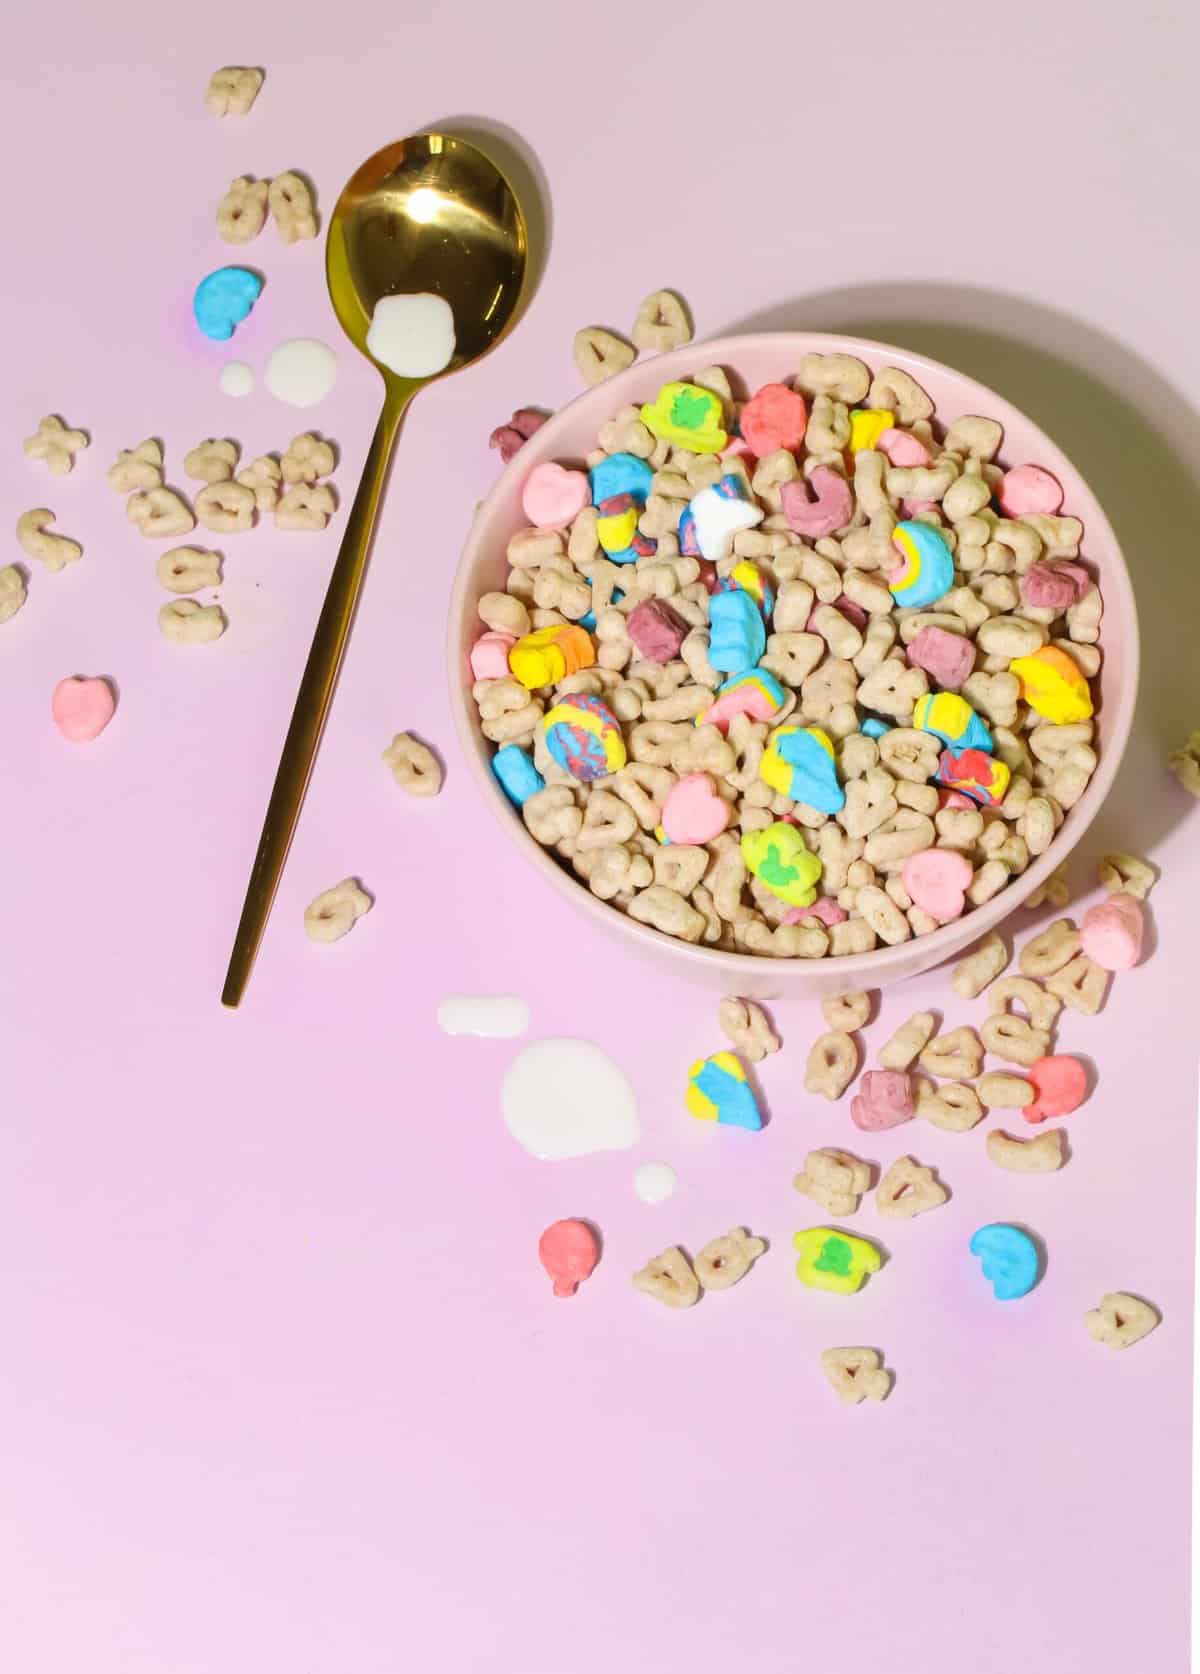 Gluten Free Cereal lucky charms in a bowl with pink background